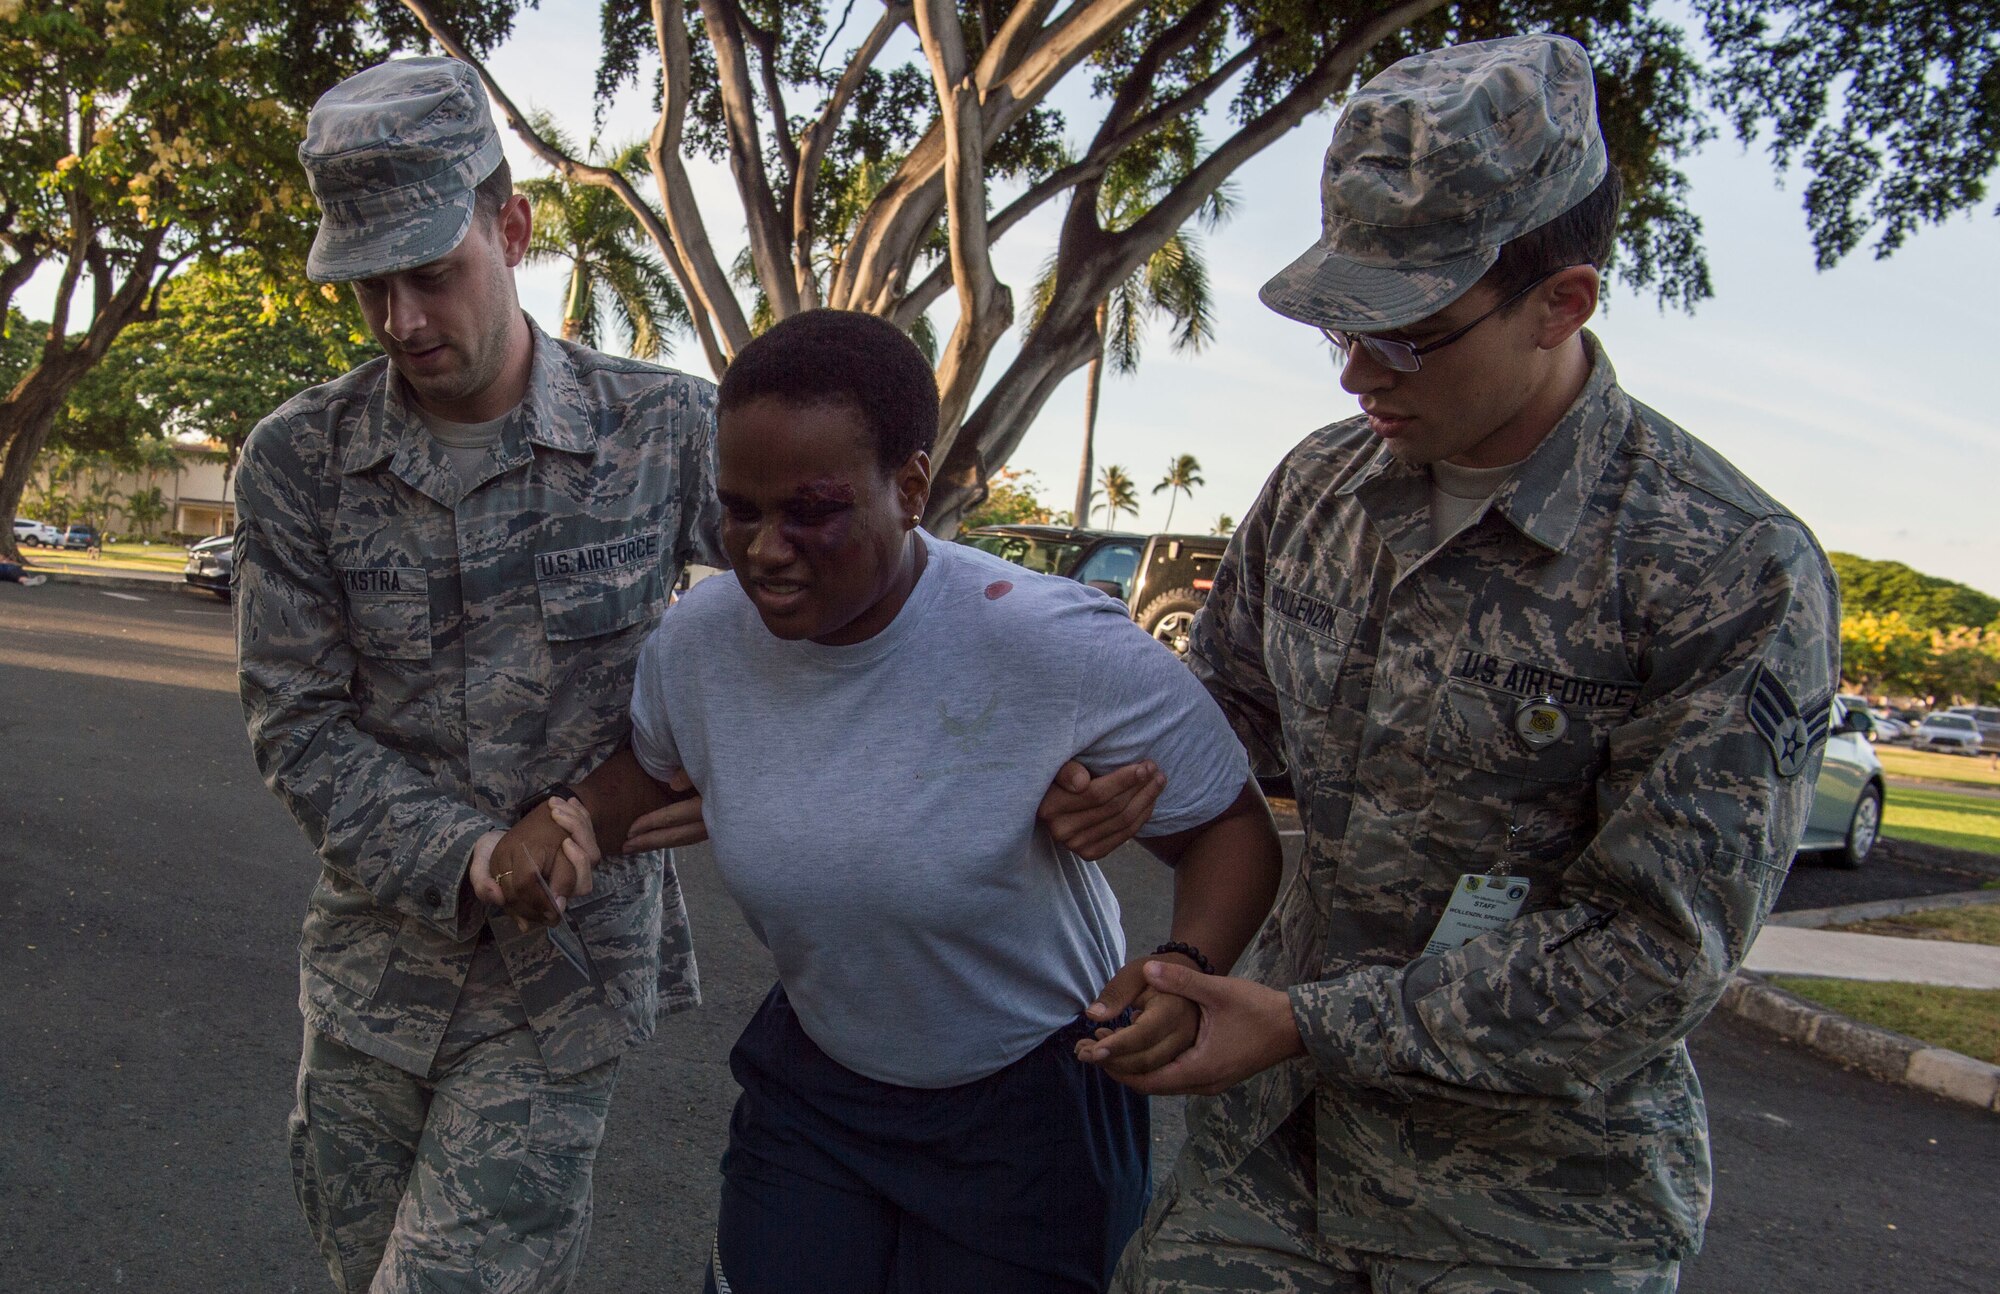 Senior Airman Logan Dykstra and Senior Airman Spencer Wollenzin, 15th Medical Group, provide aid to Staff Sgt. Nyasia Clark during a mass-casualty scenario for Rim of the Pacific exercise at Joint Base Pearl Harbor-Hickam, July 12, 2018. Twenty-five nations, 46 ships, five submarines, about 200 aircraft and 25,000 personnel are participating in RIMPAC from June 27 to Aug. 2 in and around the Hawaiian Islands and Southern California. The world’s largest international maritime exercise, RIMPAC provides a unique training opportunity while fostering and sustaining cooperative relationships among participants critical to ensuring the safety of sea lanes and security of the world’s oceans. RIMPAC 2018 is the 26th exercise in the series that began in 1971. (U.S. Air Force photo by Tech. Sgt. Heather Redman)